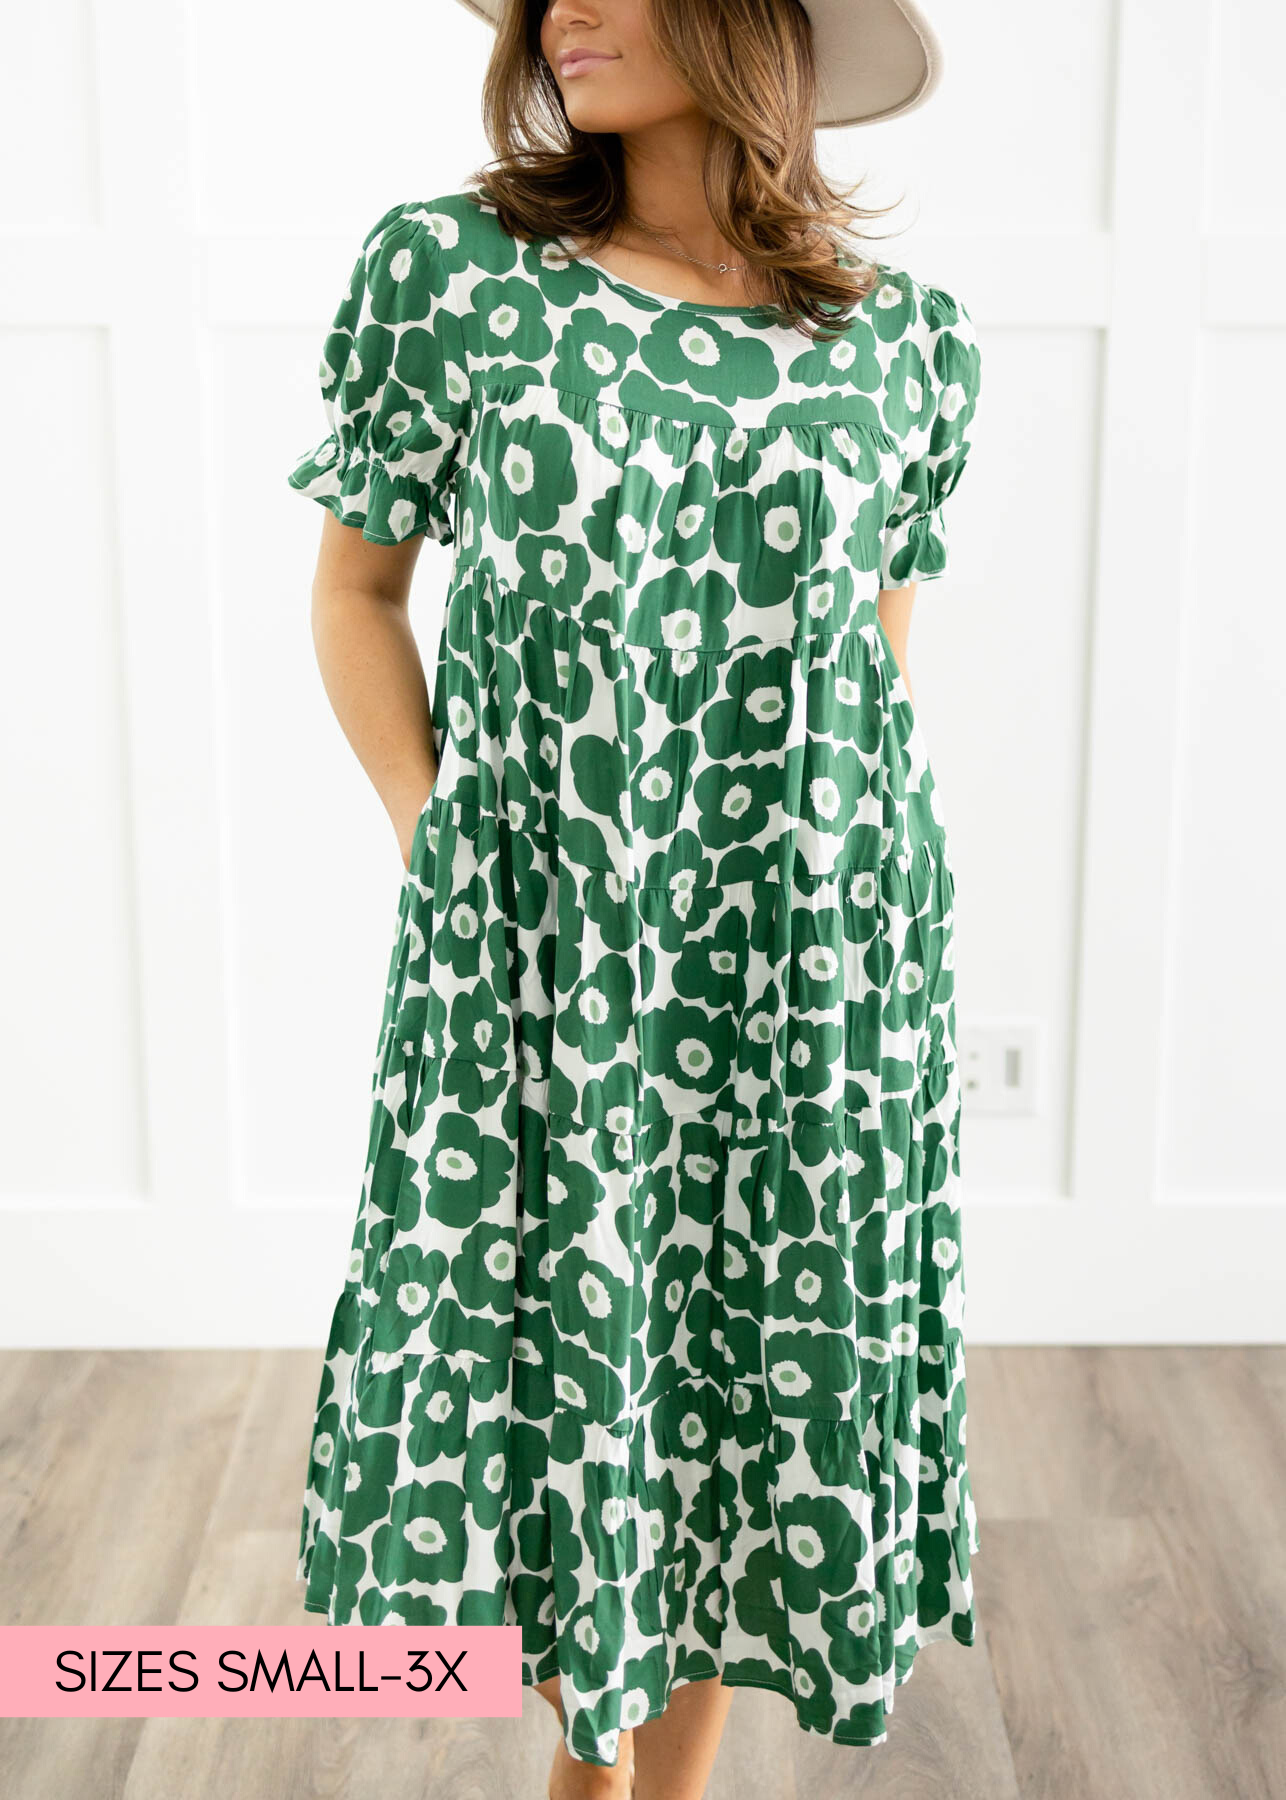 Green floral dress with a tiered skirt and pockets